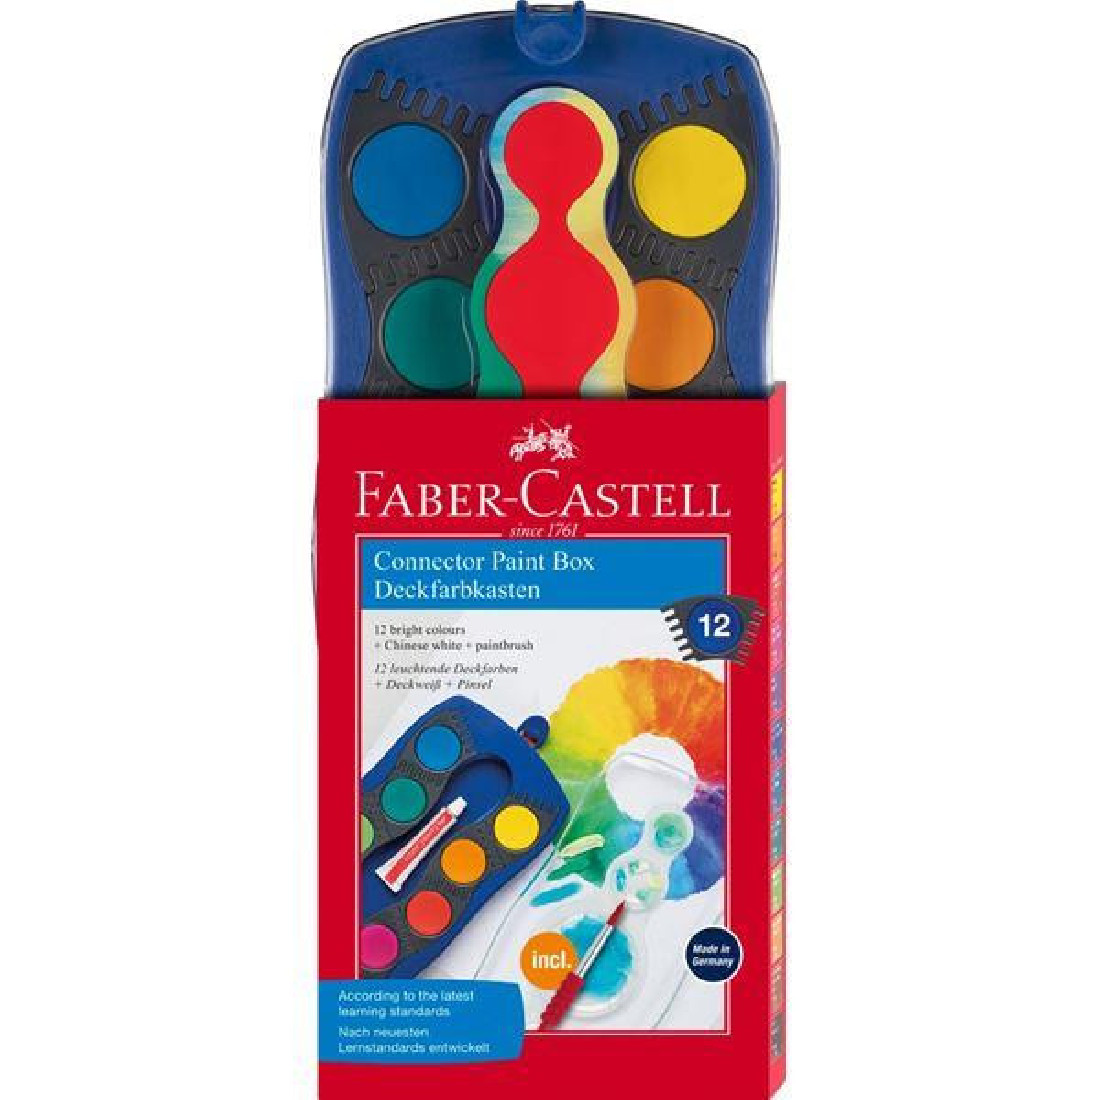 Faber Castell Connector Paint Box (νερομπογιές)- 12 Colors 125050